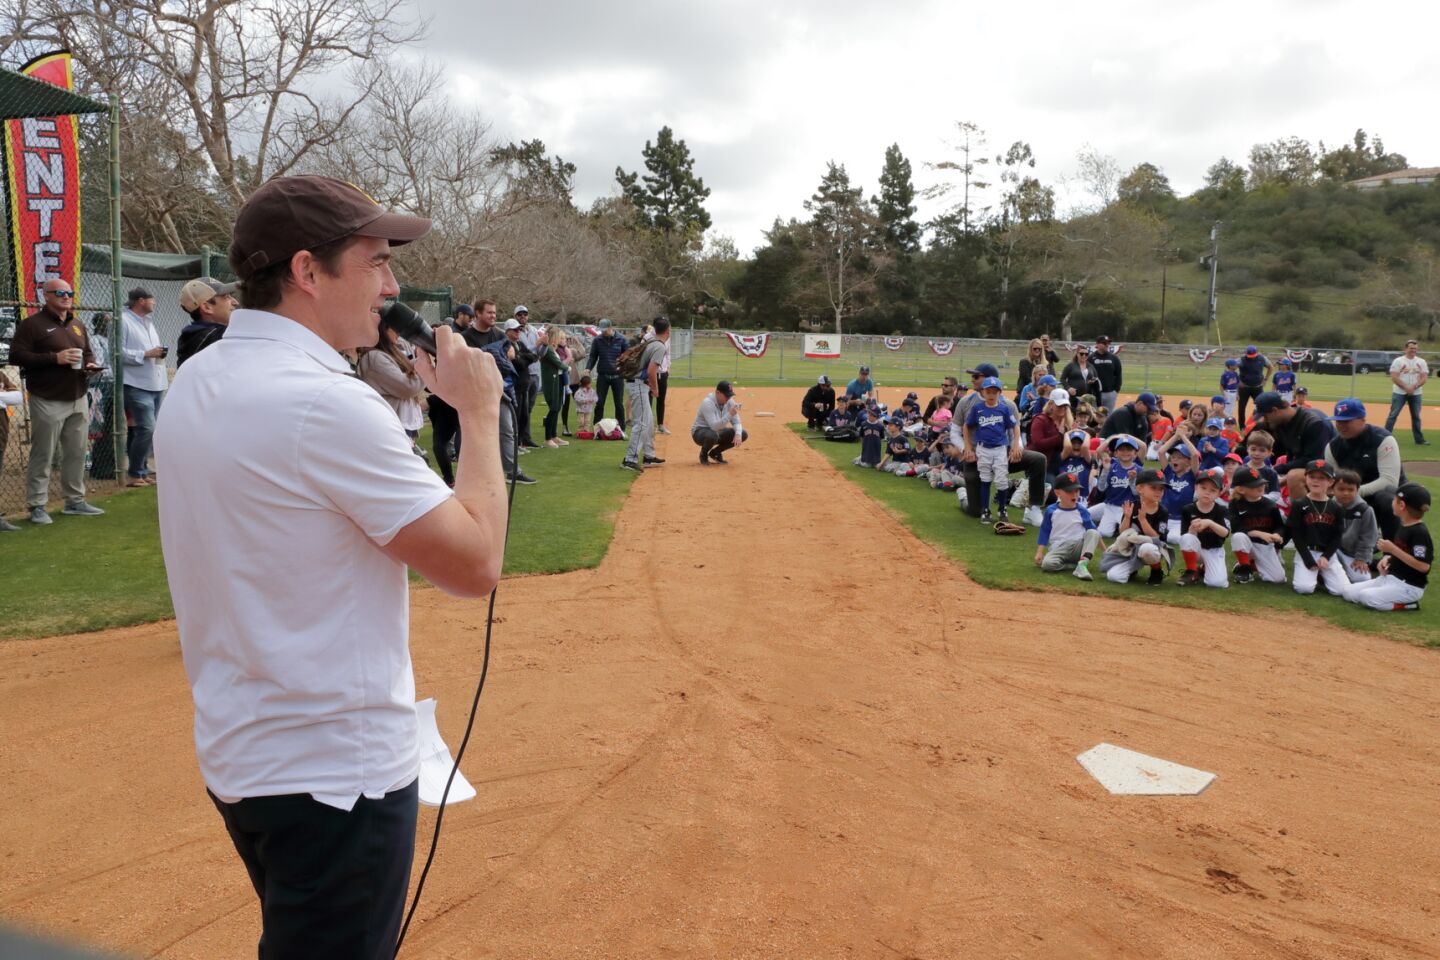 Tim O'Donovan welcomes players and families to the 2022 RSF Little League Opening Day